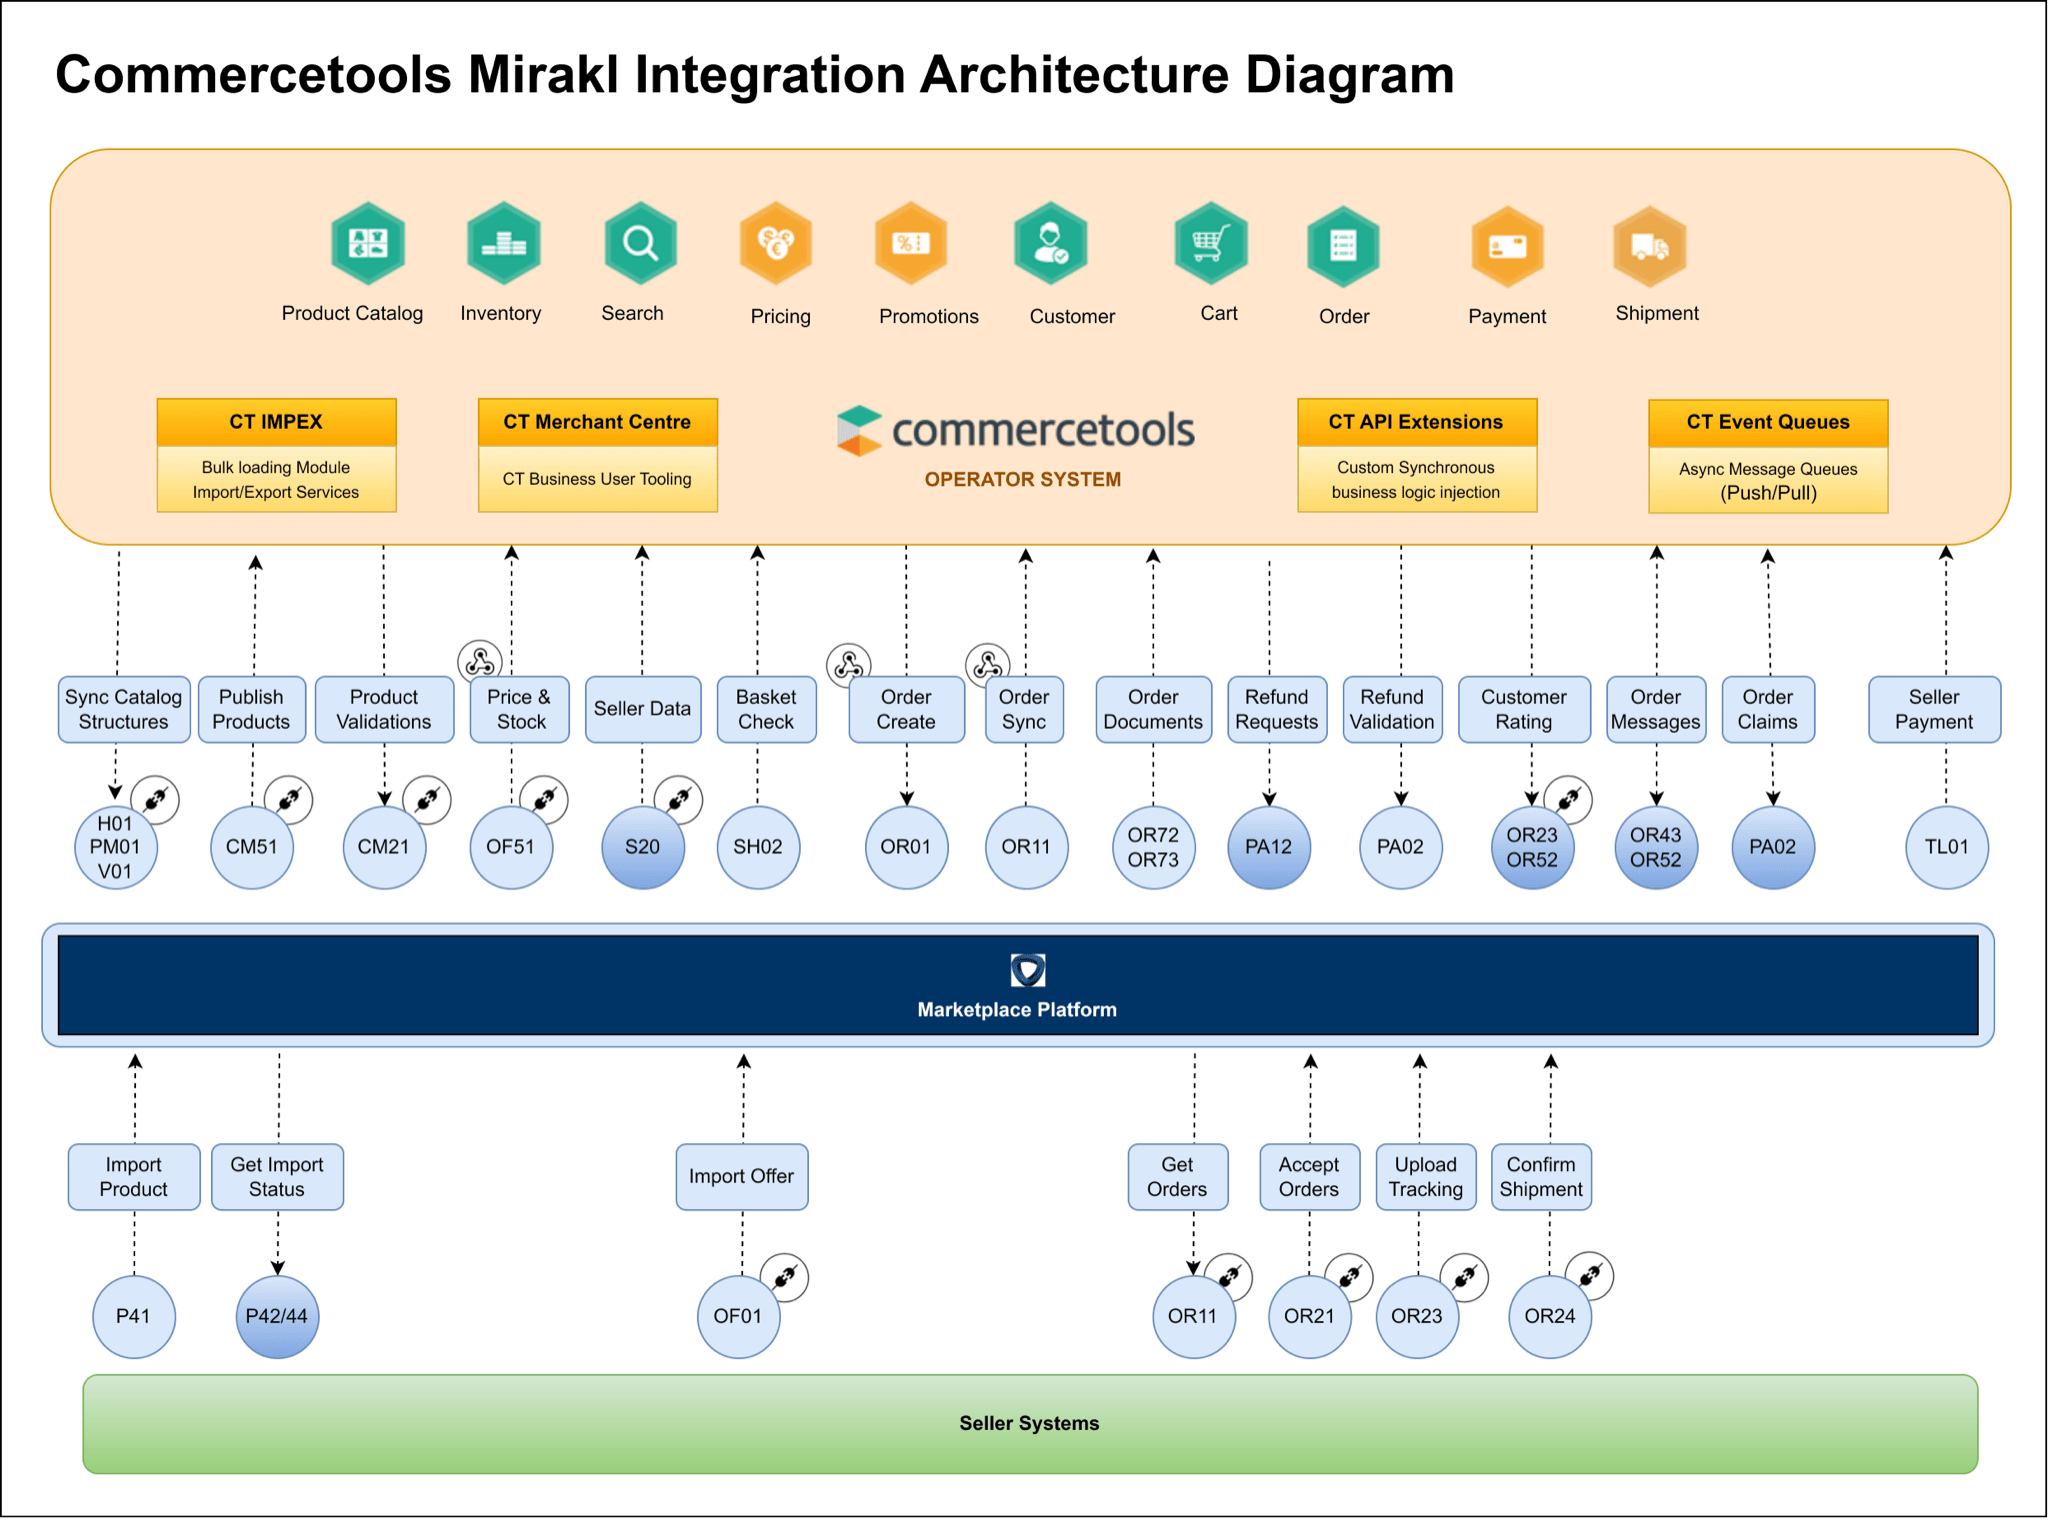 mirakl-connectors-architecture-diagram-v7-resized.png